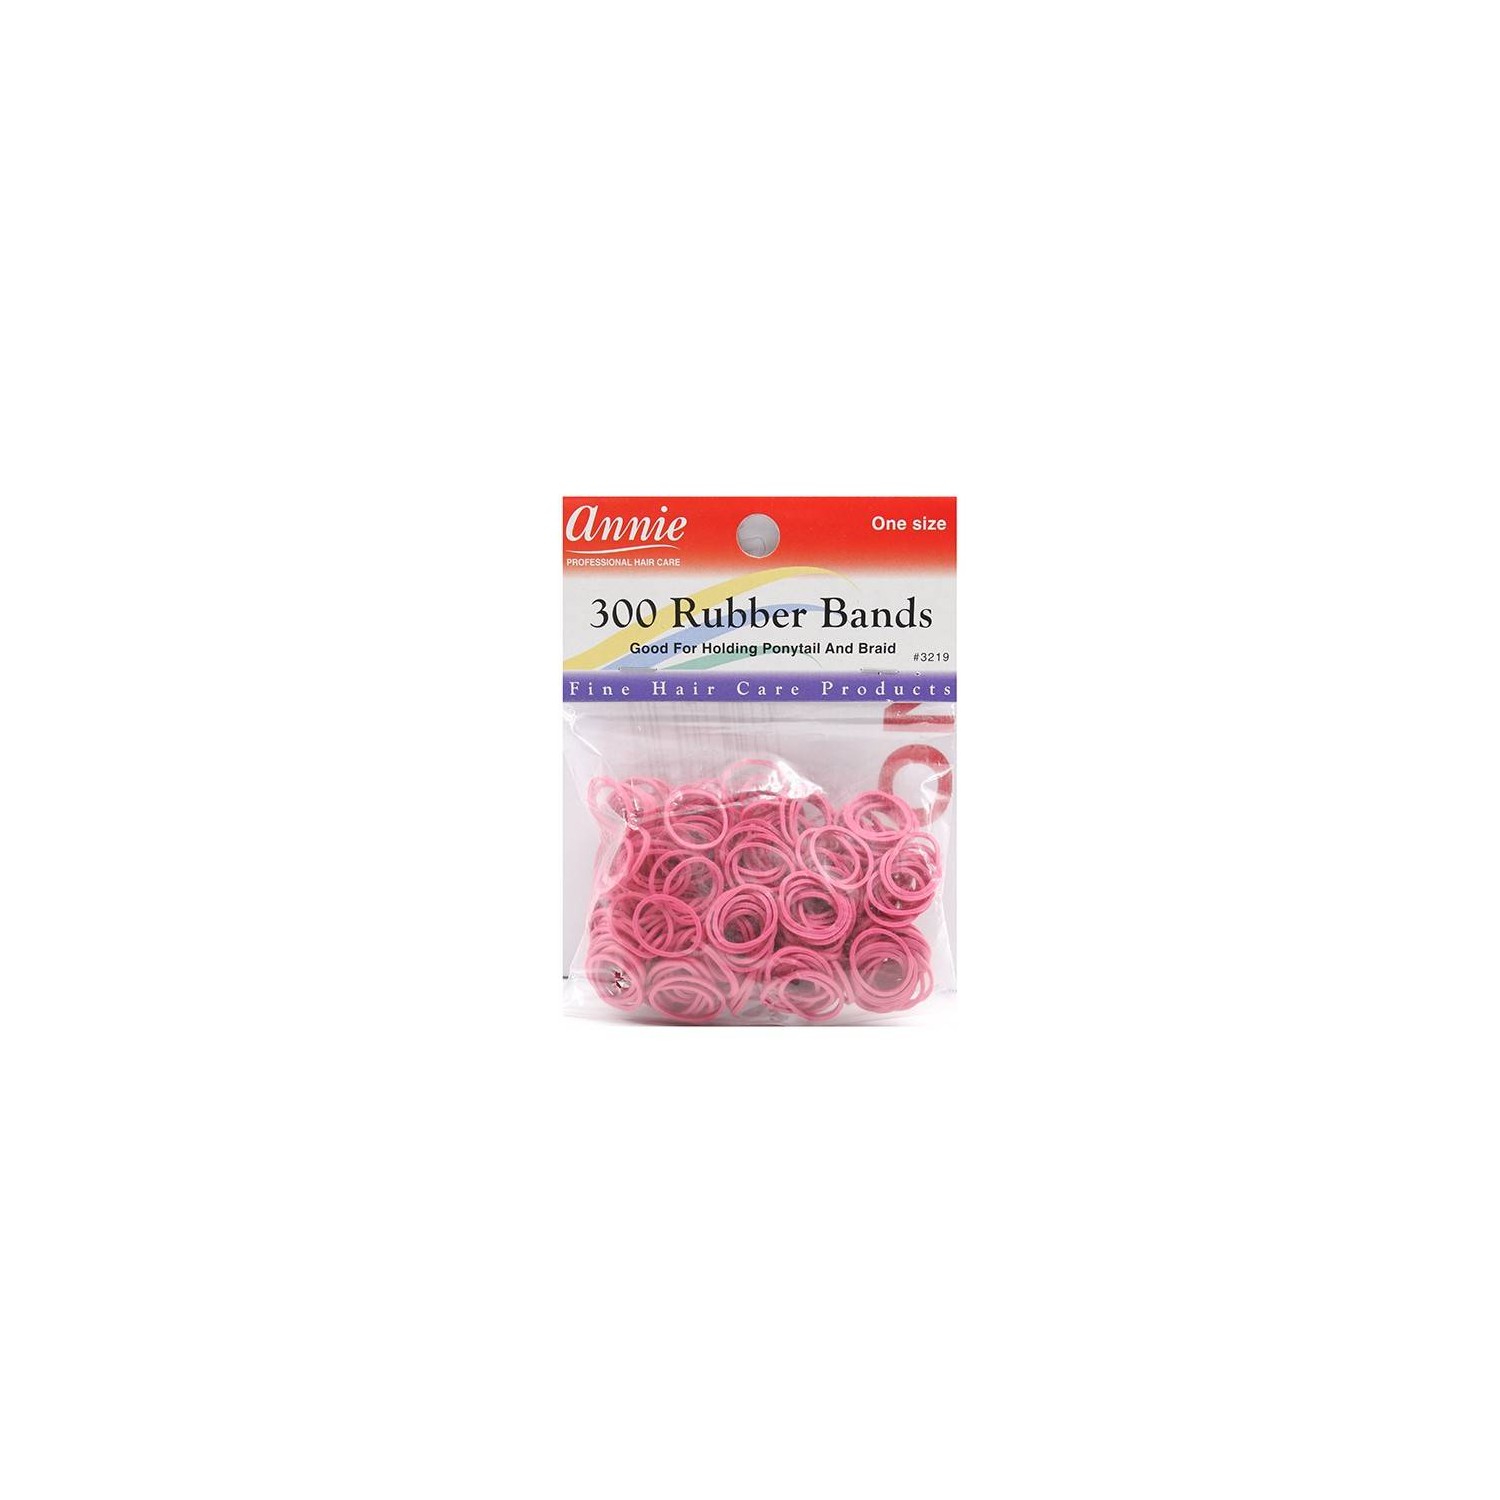 Annie 300 Rubber Bands Pink 3219 (rubbers)